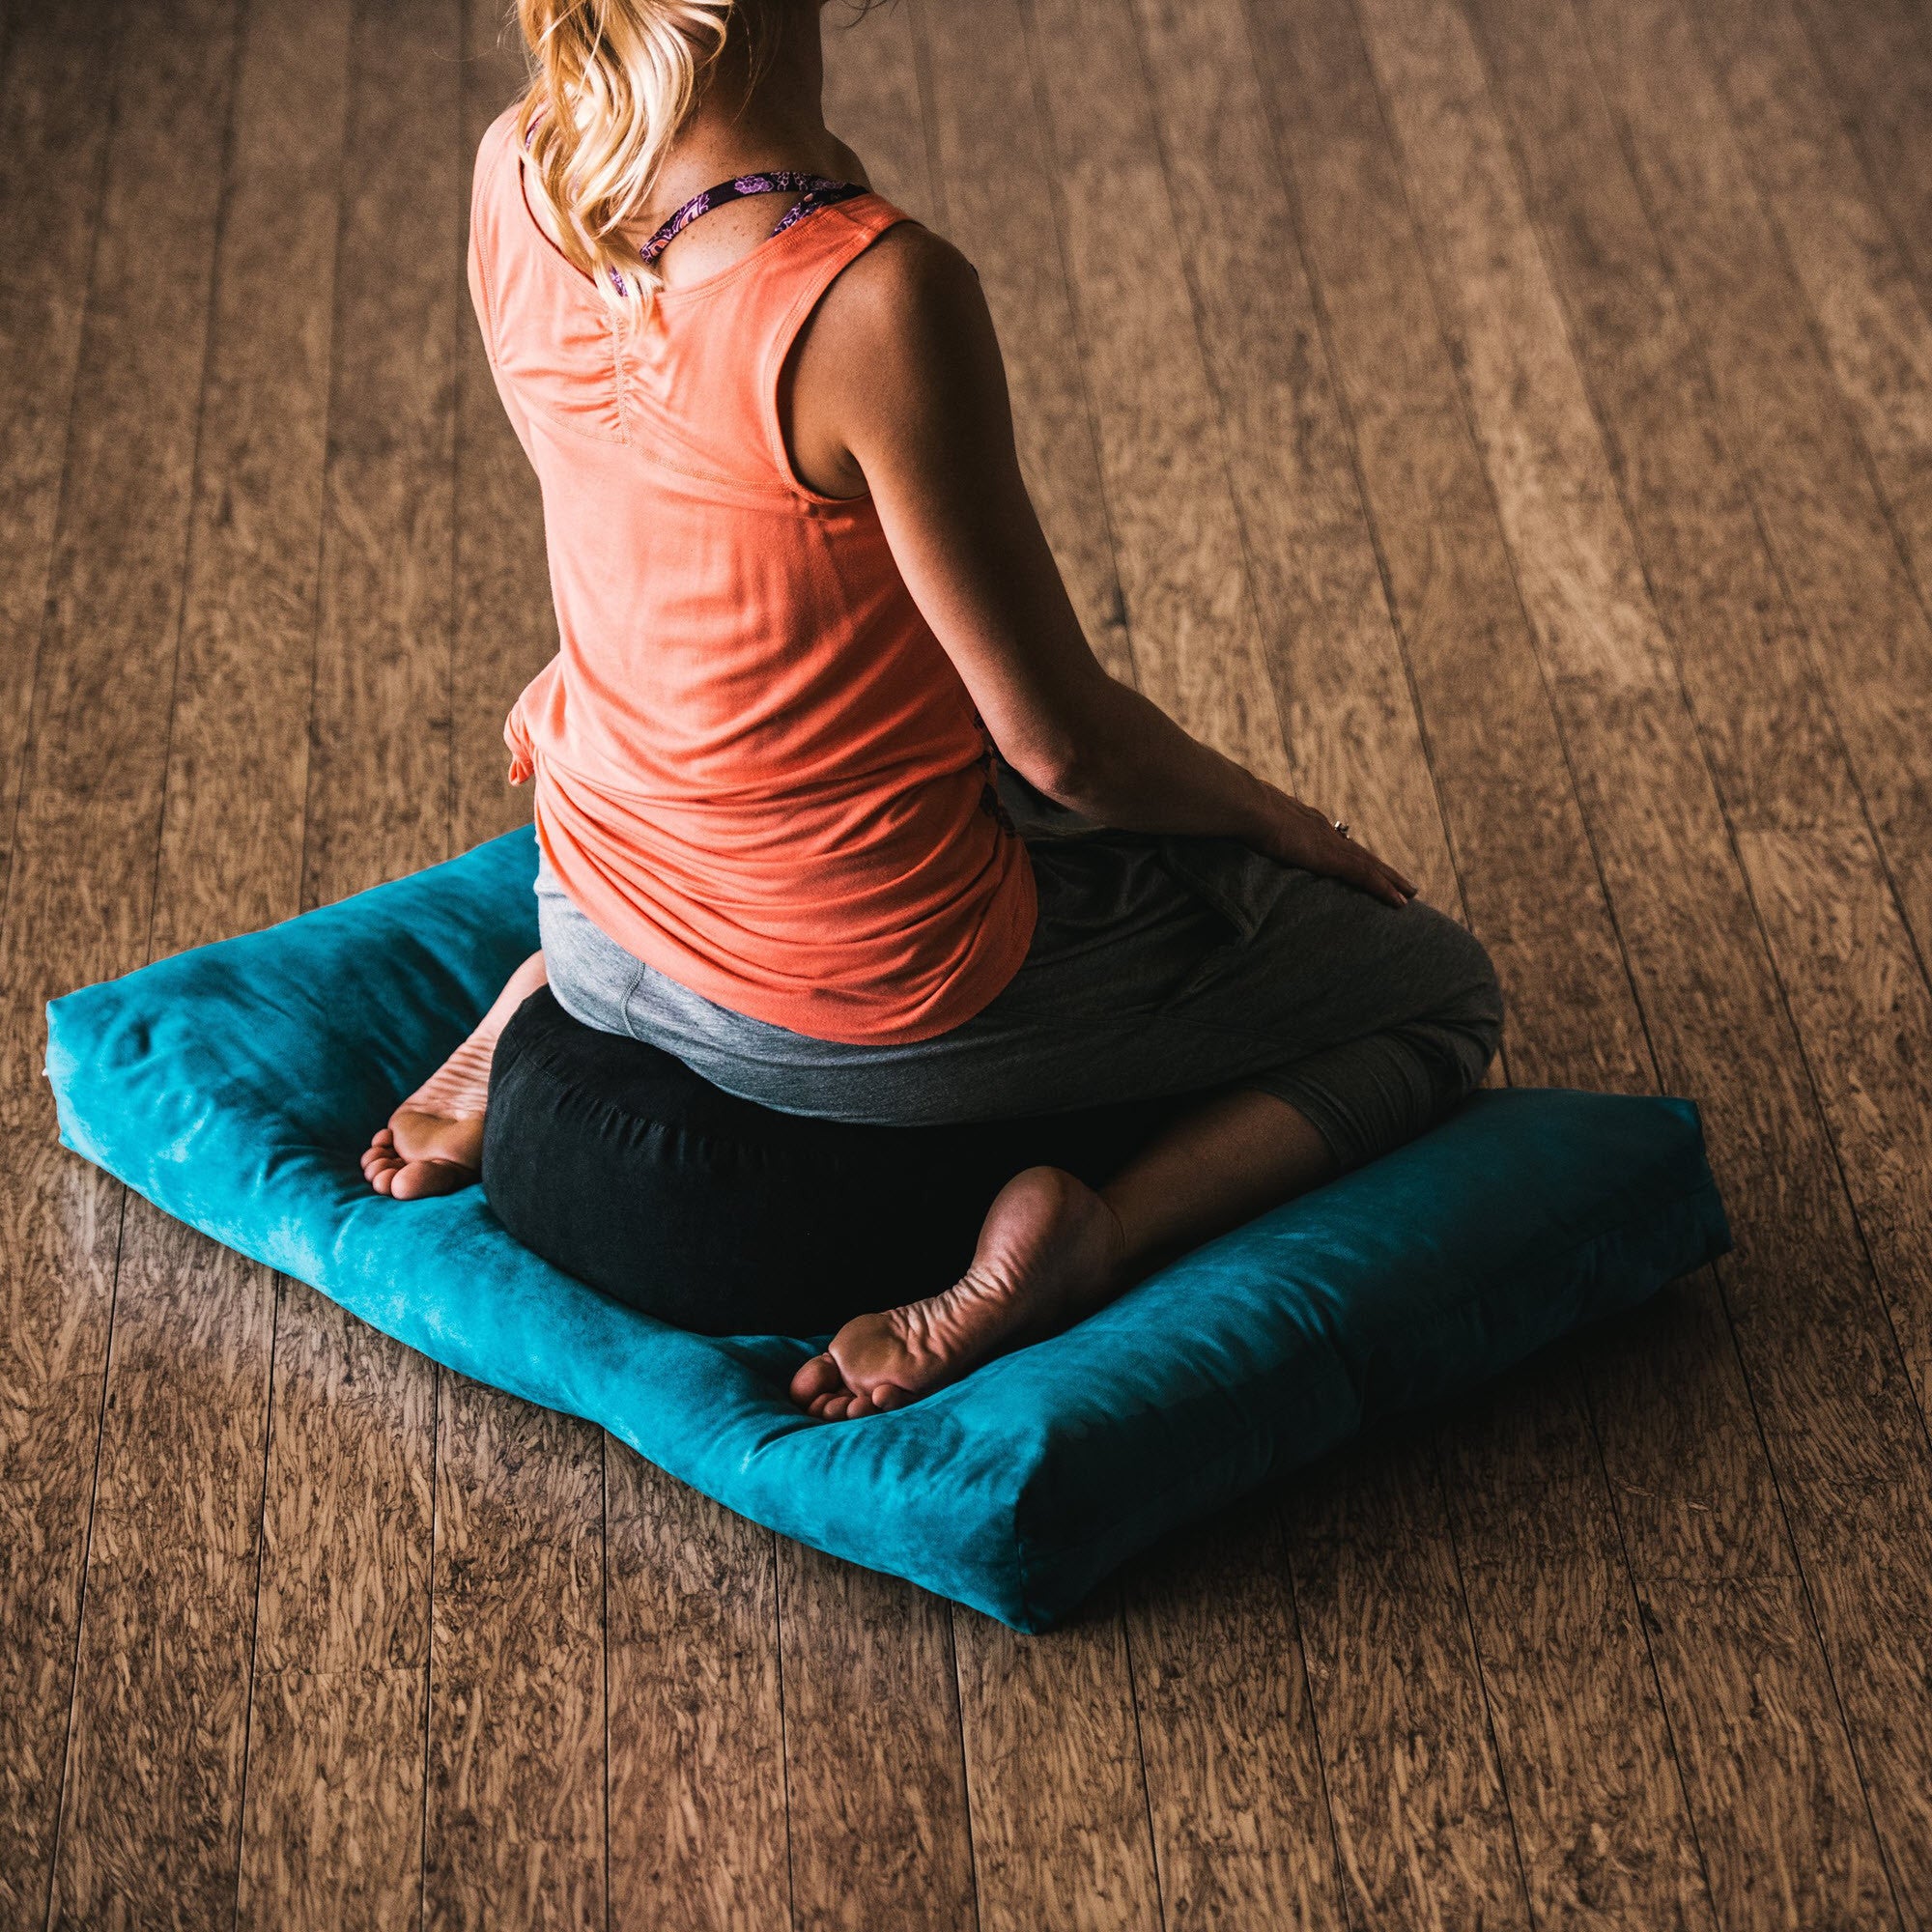 Yoga Bolster Meditation Cushion with Removable Washable Cover, with Carry  Handle